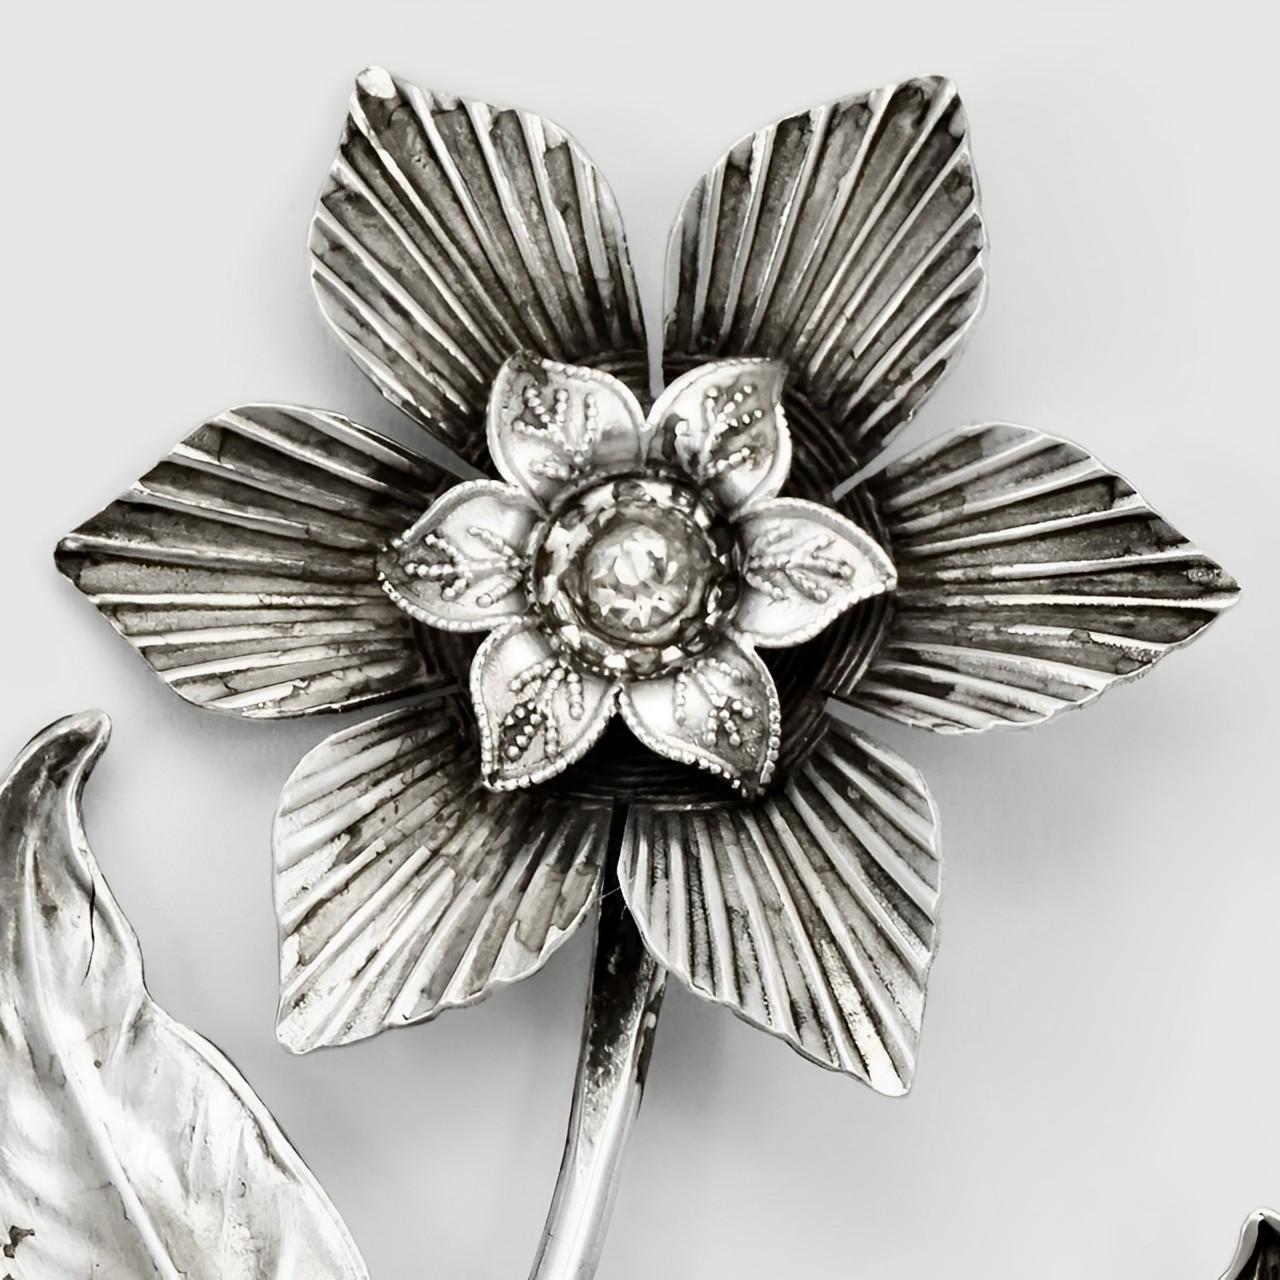 Beautiful sterling silver flower brooch set with a single rhinestone. Measuring length 11.8 cm / 4.6 inches by width 4.5 cm / 1.77 inches. We have given the brooch a light clean.

This is a stylish sterling silver statement brooch.